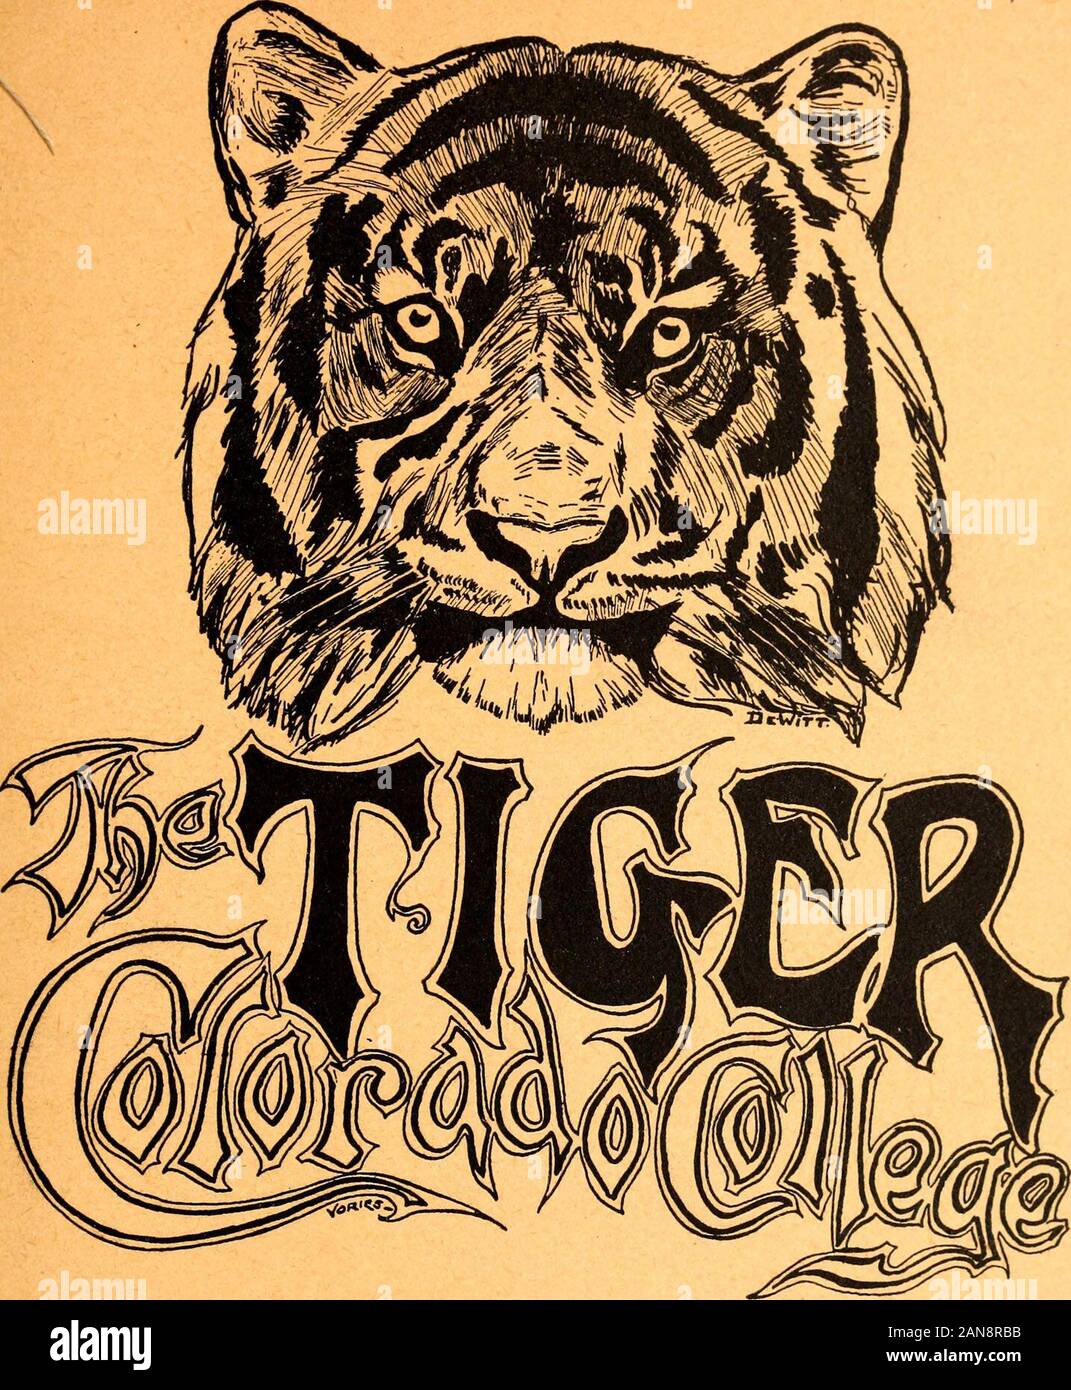 The Tiger (student newspaper), Sept1903-June 1904 . ] i Wheels Called for and Delivered. 113 EASr KIOWA STREET :: O. E. HEMENWAY Groceries and Meats J15 S. Tcjon St., COLORADO SPRINGS, COLO. „Hm|»MIMIHM**4*^^^. September 301903 Volume VI Nvimbei 3 ^H..|»|n|»|M|n|„M4»*****^ »»H IIV* jj Special Rates to Students ON RENTED PIANOS THE KNIGHT-CAMPBELL Music Company NEW LENNOX BLOCK OPPOSITE NORTH PARK J St. John Bros.,PRACT,CALPLlMBERS GAS &lt;AND STEAM FITTERS Hot Water Heating a Specialty Prompt attention given to Repair Work. : Curtis Coal 60. Office, 132 N. Tejon Street. Telephone 91 Try NEW RA Stock Photo